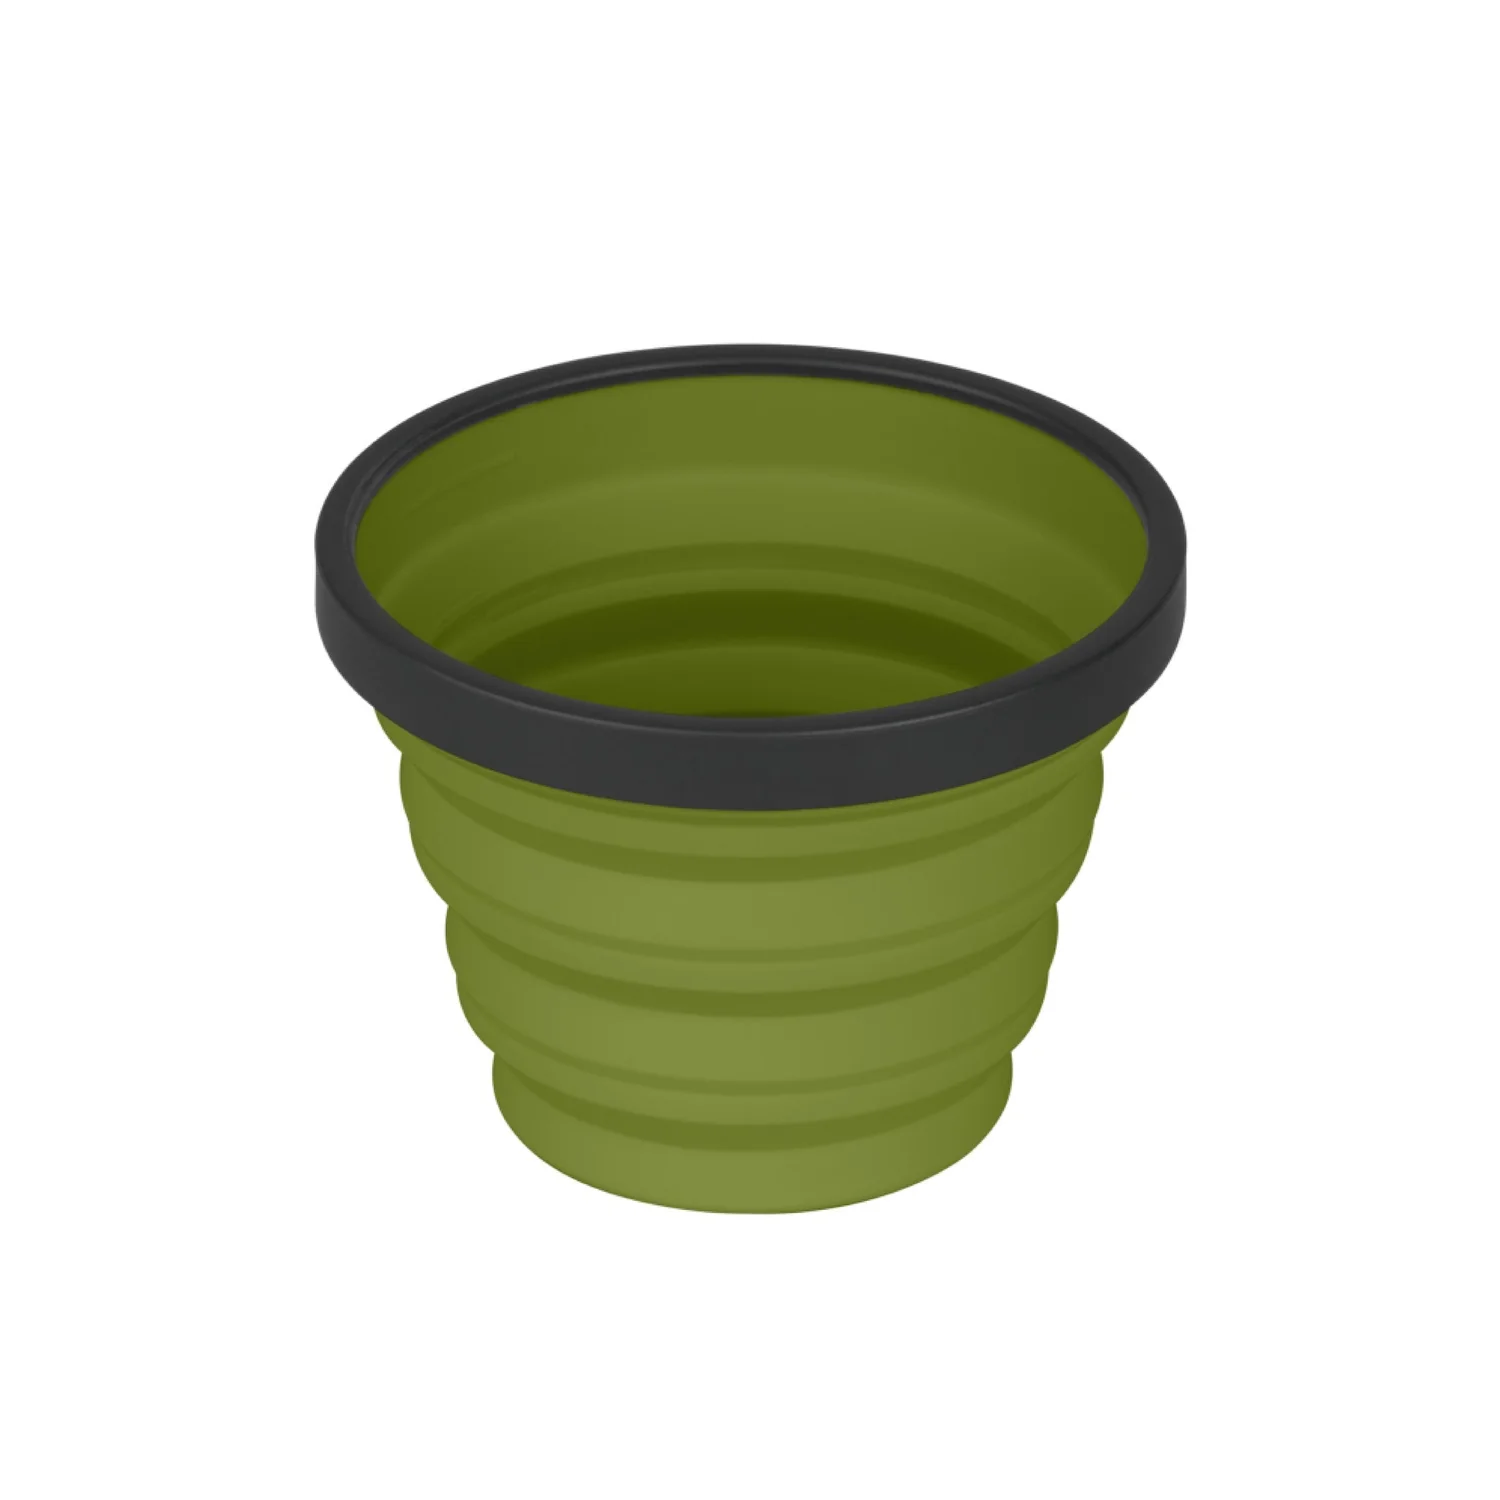 collapsible-hot-coffee-tea-camping-cup-olive_176a5298-15cd-4e44-bae3-f92b00ff9561